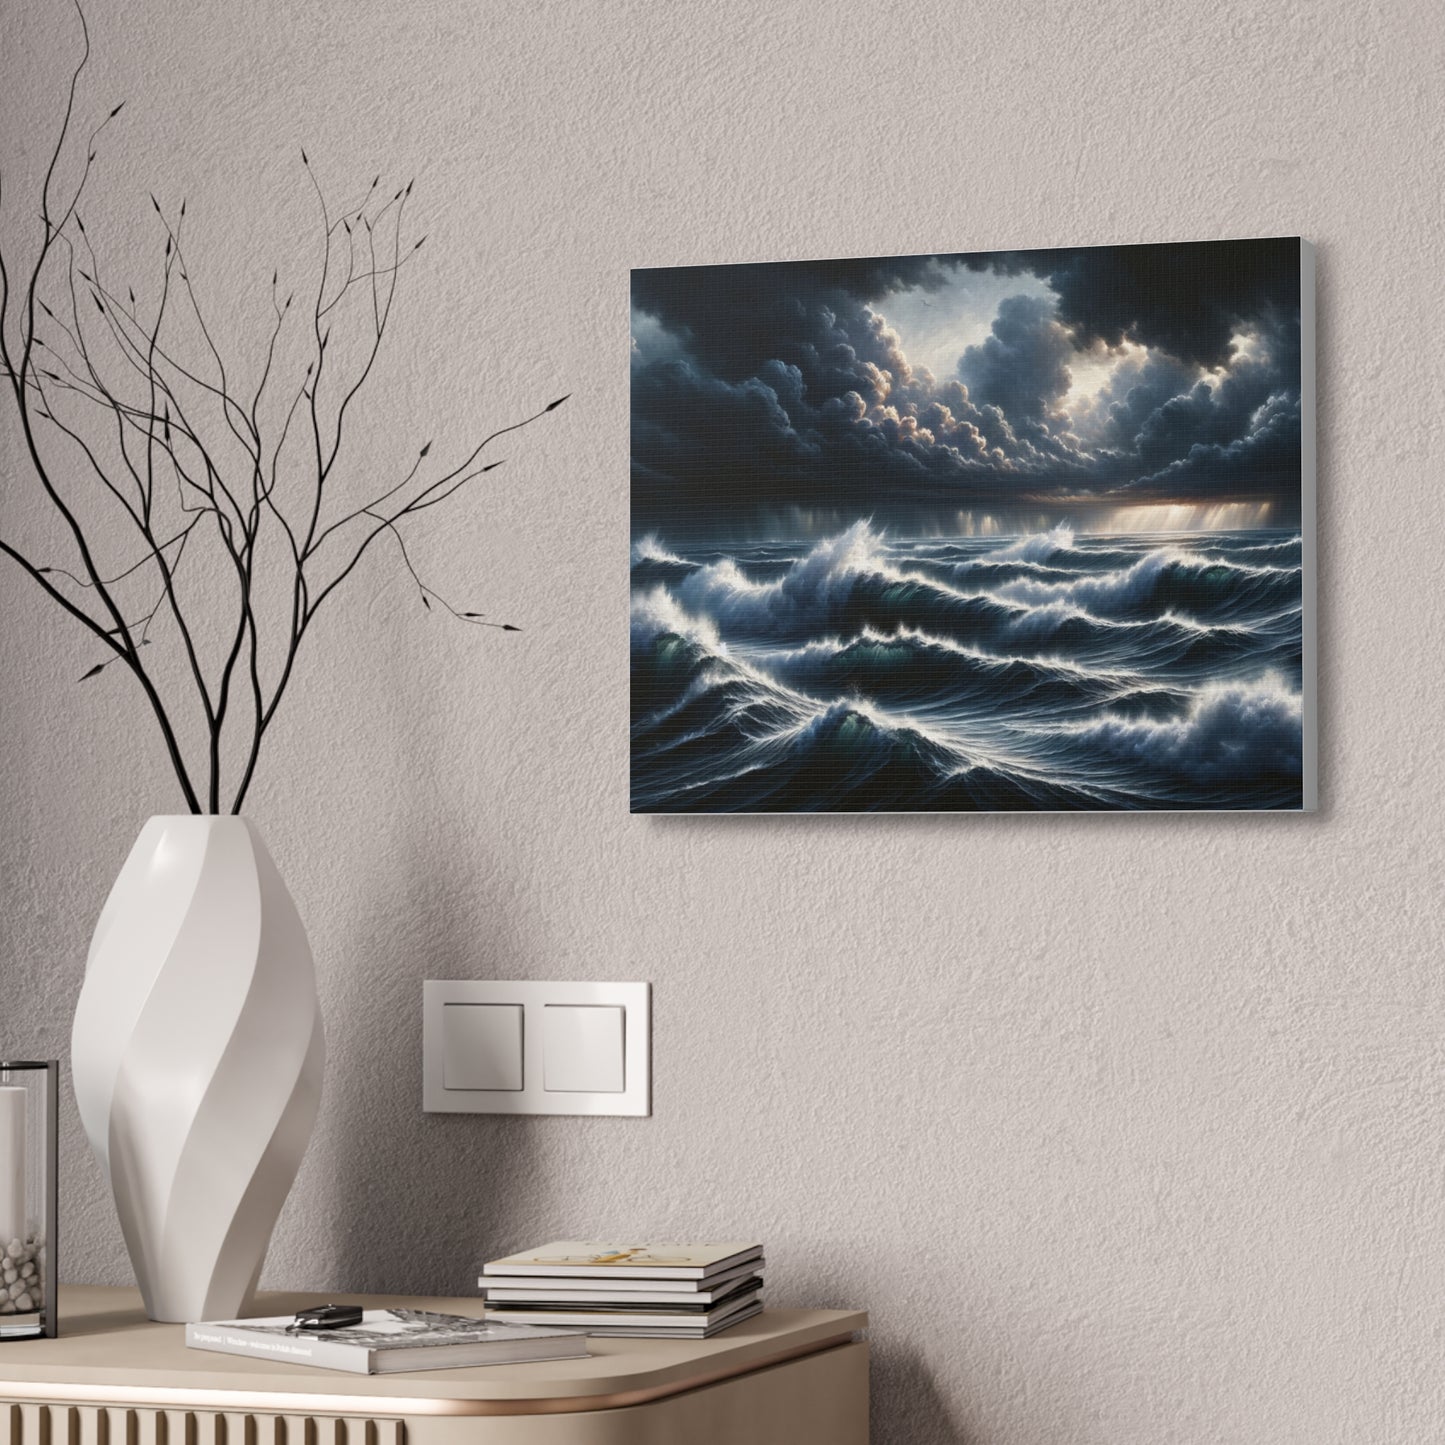 Ocean's Fury Canvas Art - Stormy Seascape with Crashing Waves